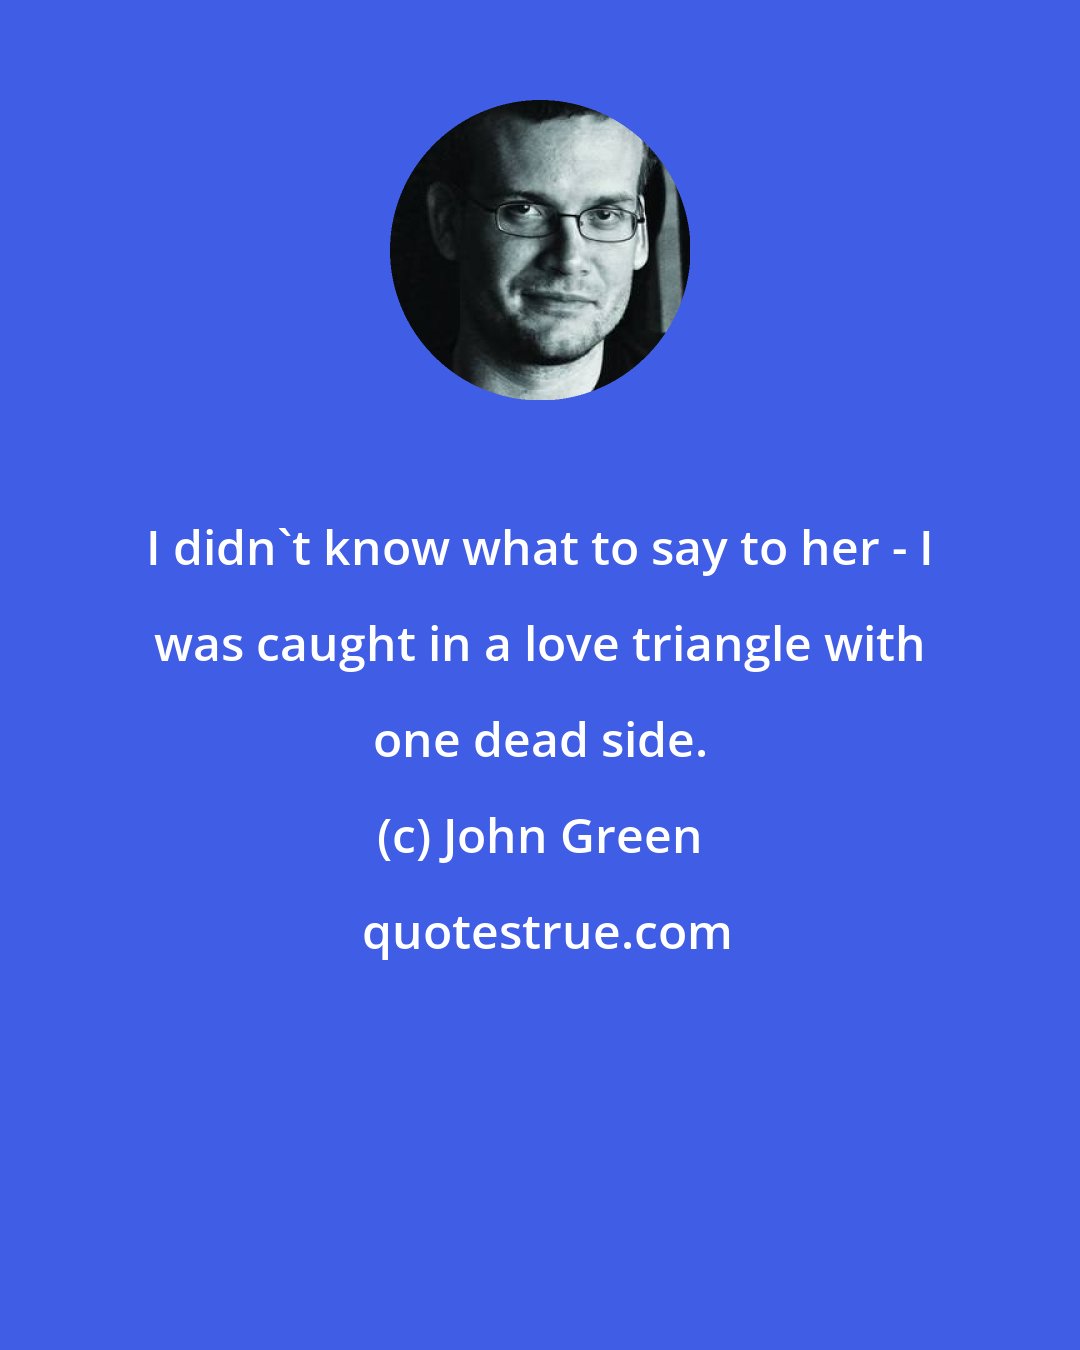 John Green: I didn't know what to say to her - I was caught in a love triangle with one dead side.